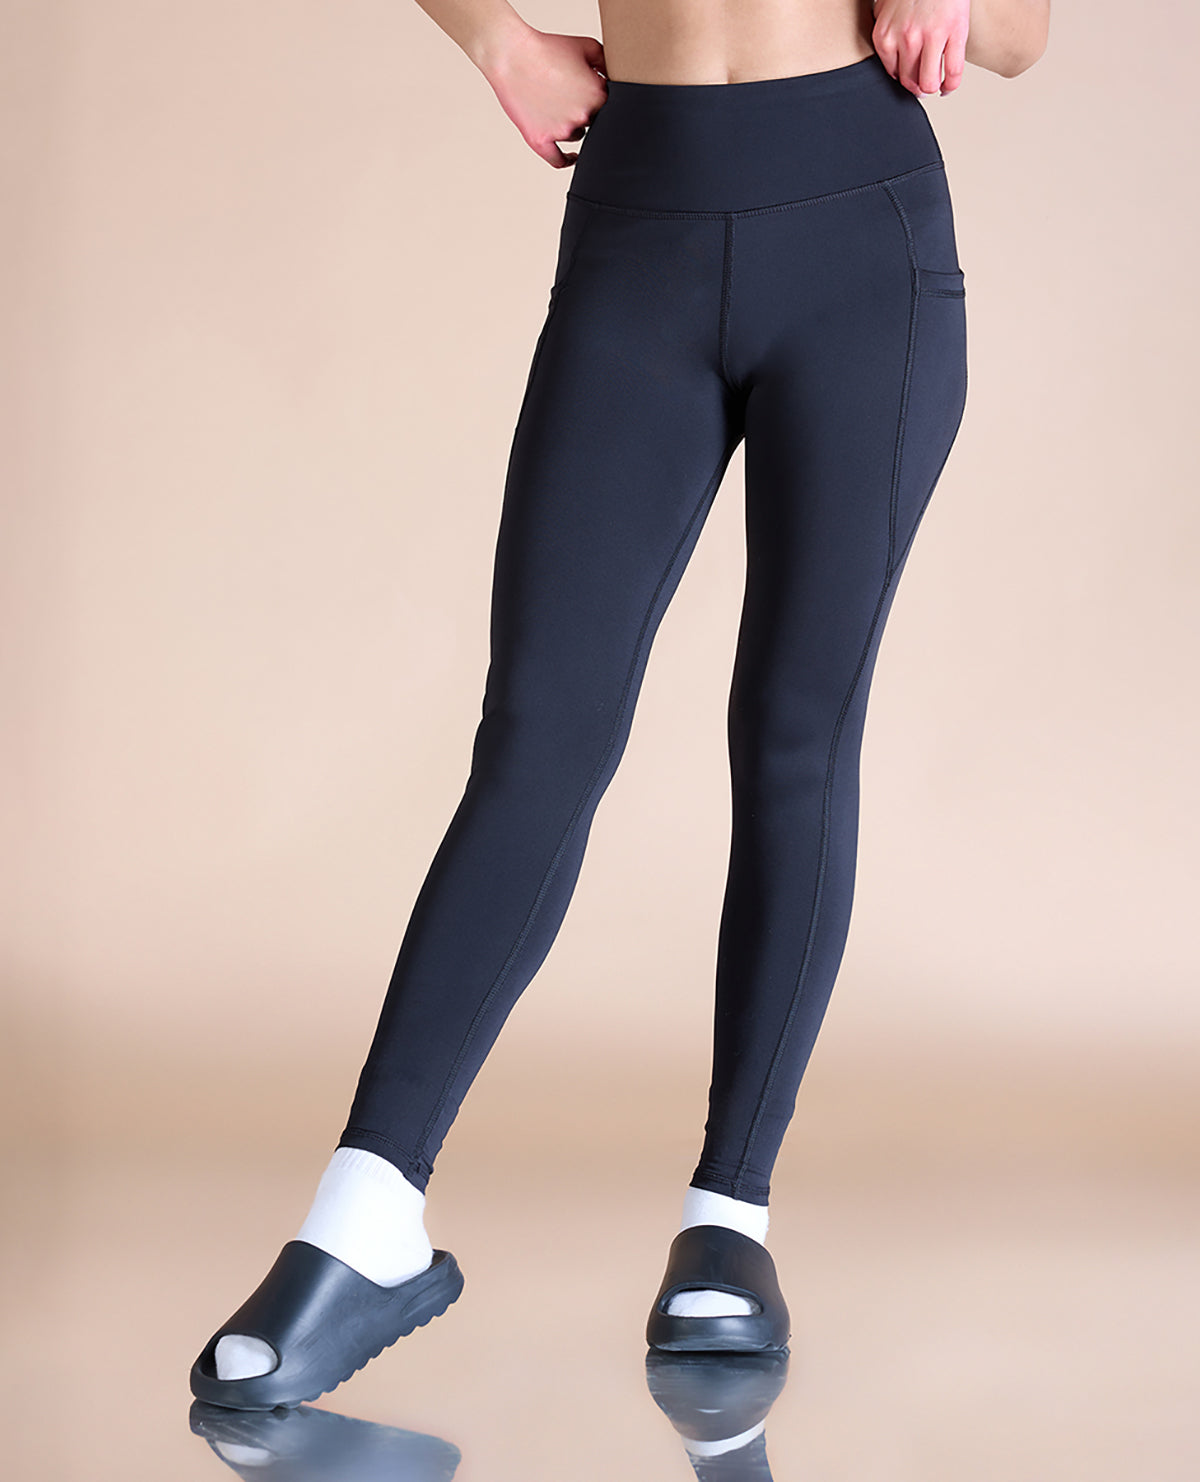 Buy Kica High Waisted Leggings in Second SKN Fabric With Pockets And  Perfect Ankle Length For Gymming and Training online